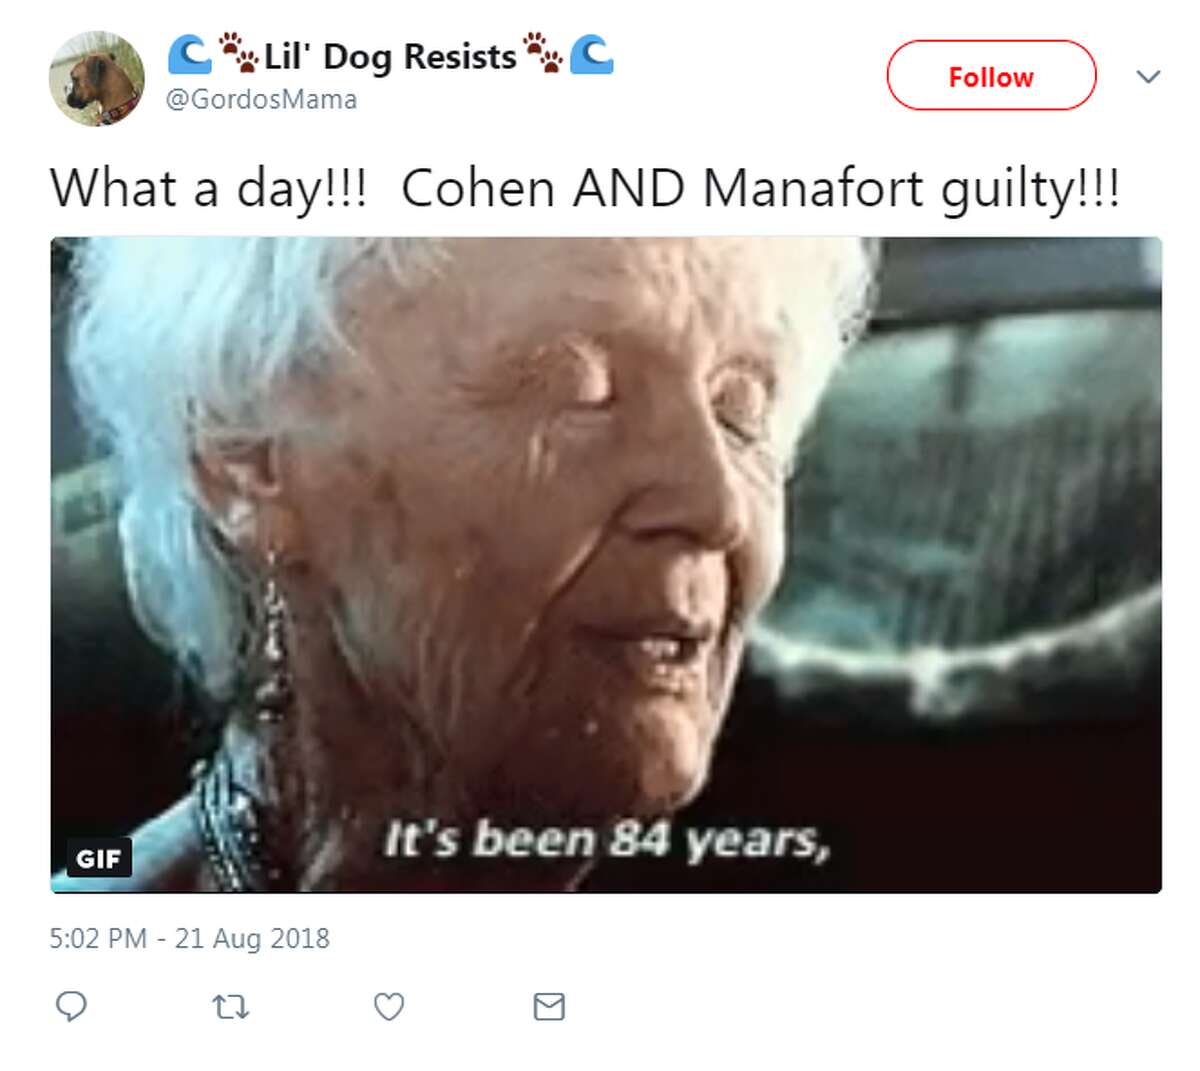 Meme obsessed internet users wasted no time capitalizing on the guilty verdicts for former Trump campaign chairman Paul Manafort and the guilty plea from Michael Cohen, President Donald Trump's former personal lawyer.